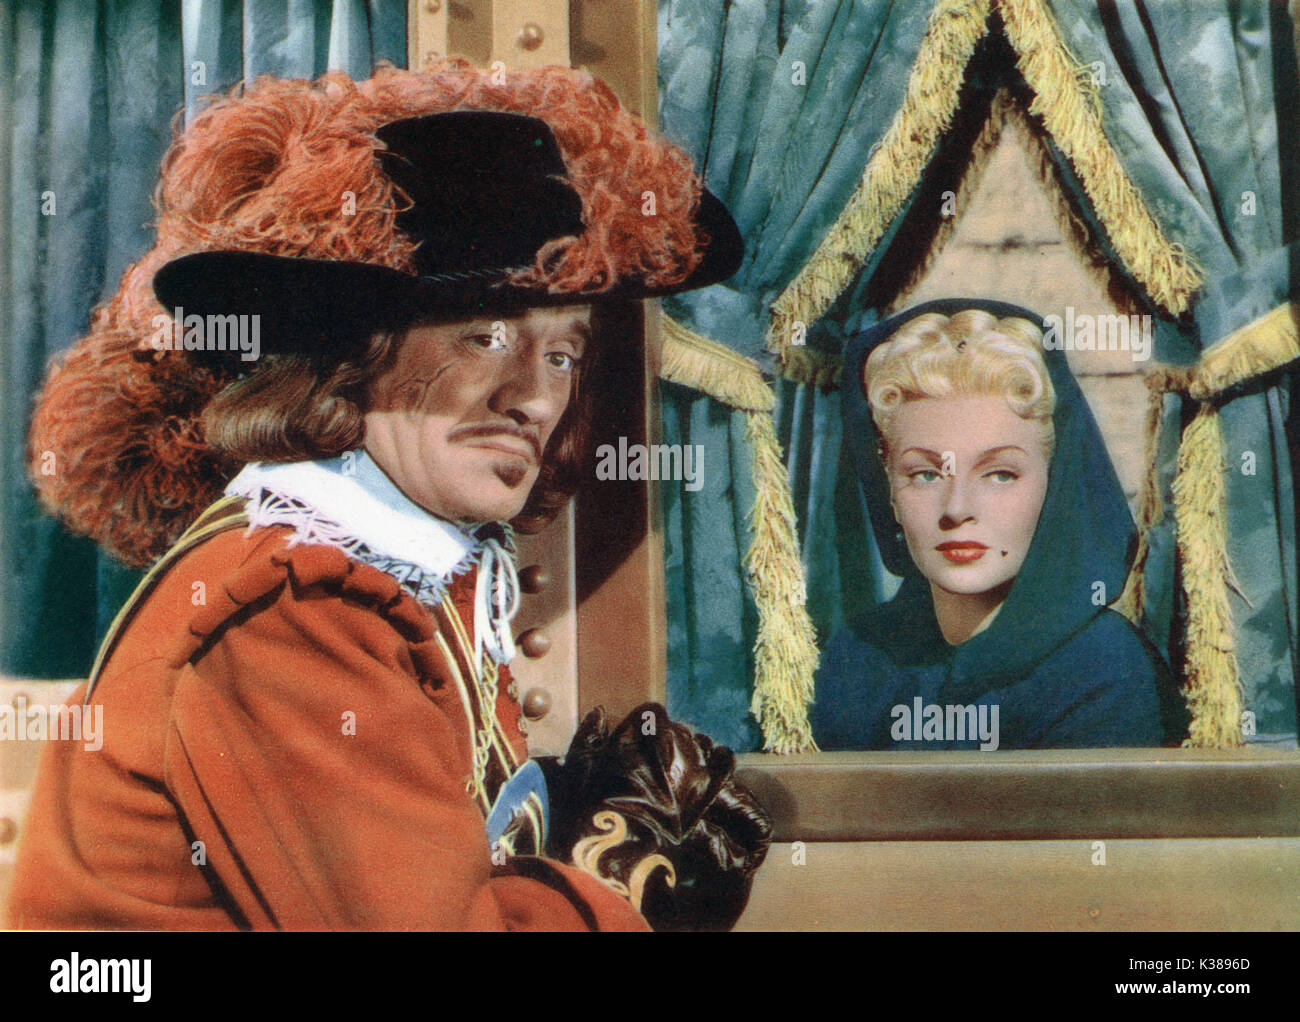 THE THREE MUSKETEERS IAN KEITH AND LANA TURNER AN MGM FILM     Date: 1948 Stock Photo